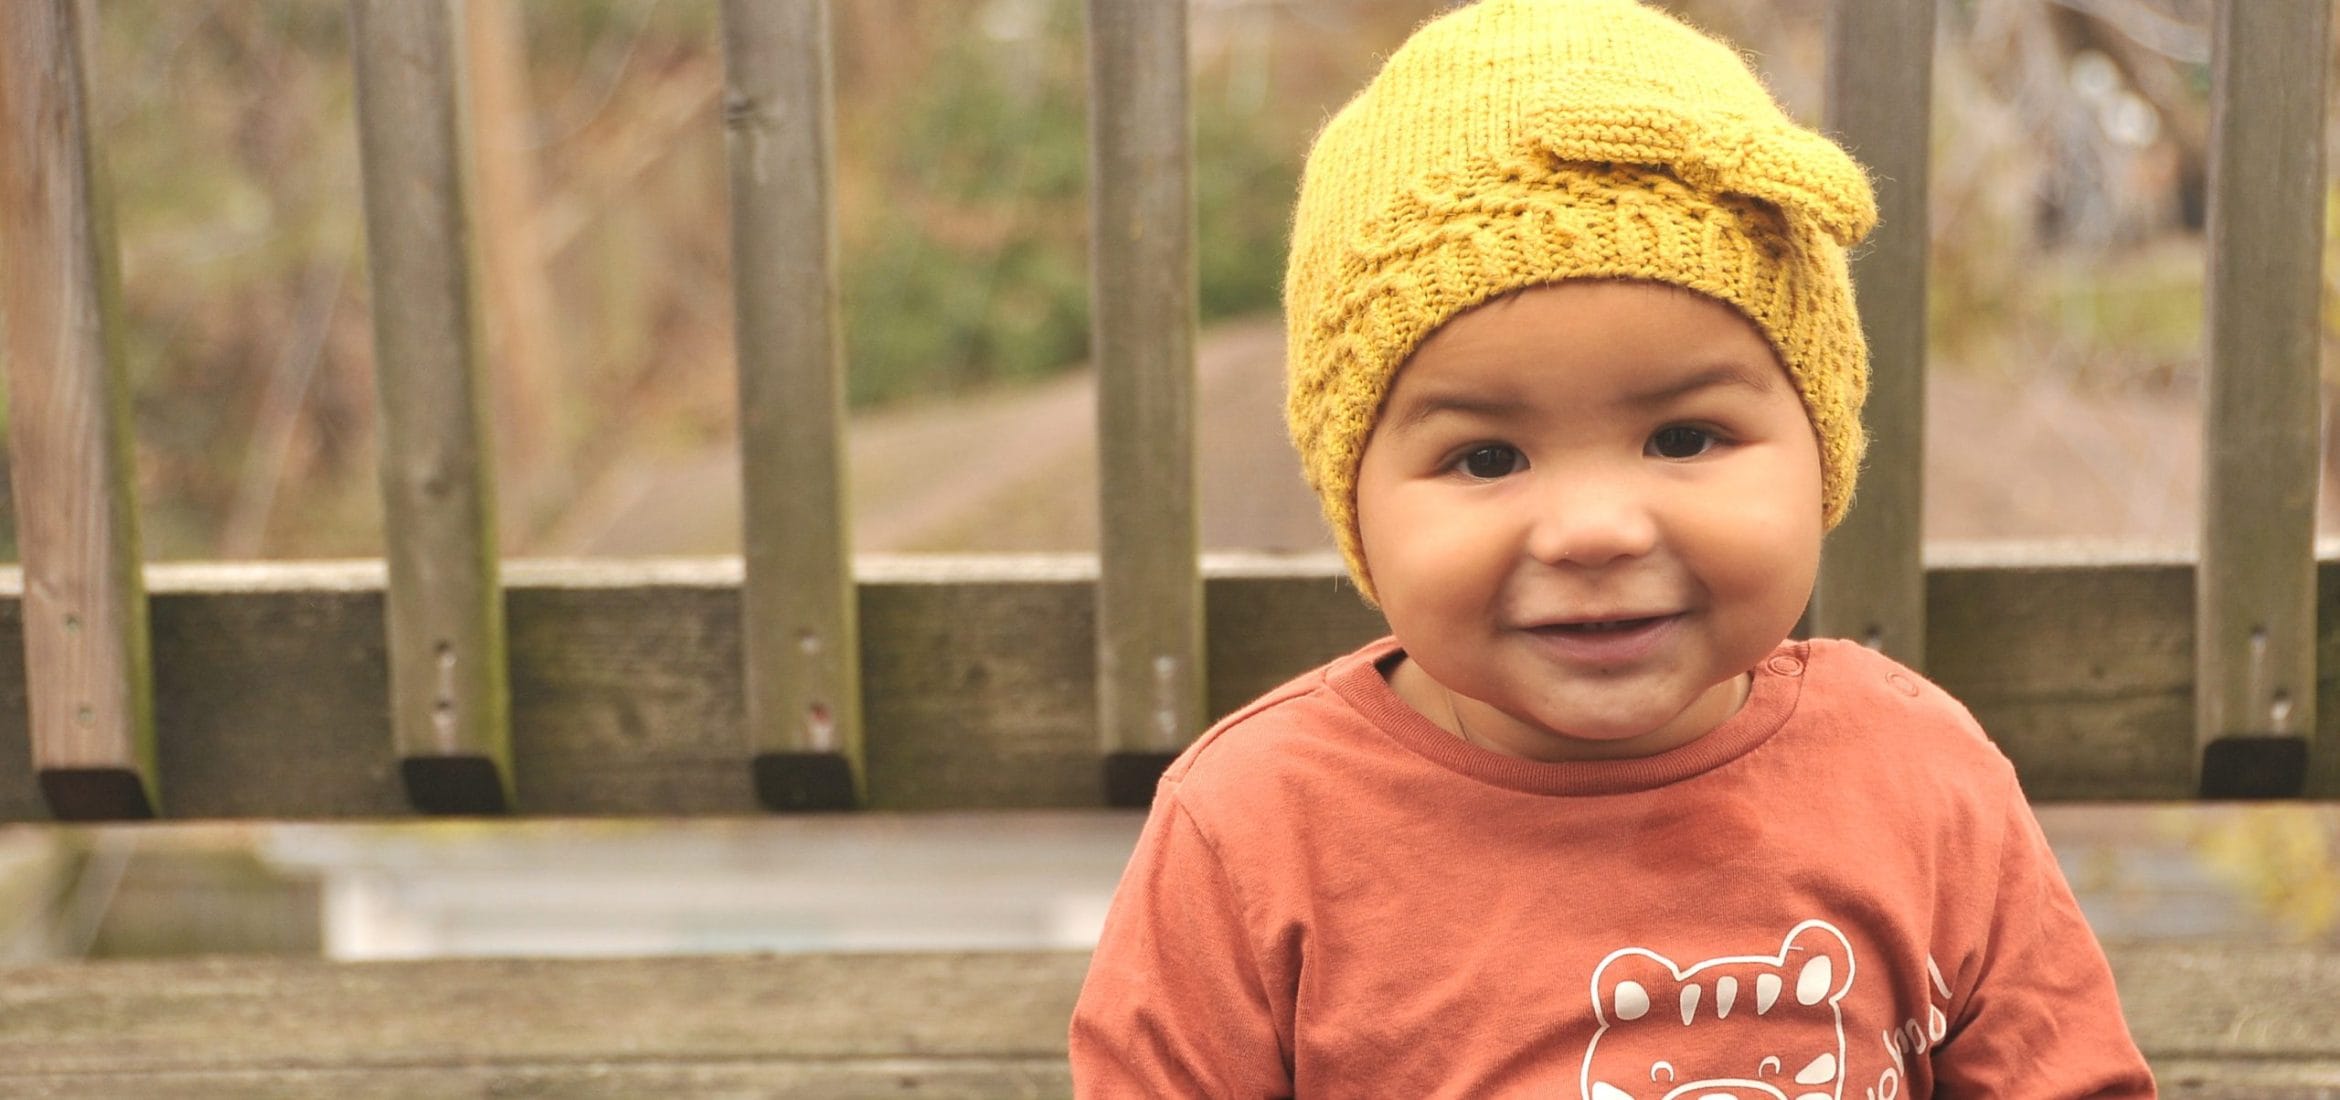 toddler in orange shirt with yellow crocheted beanie